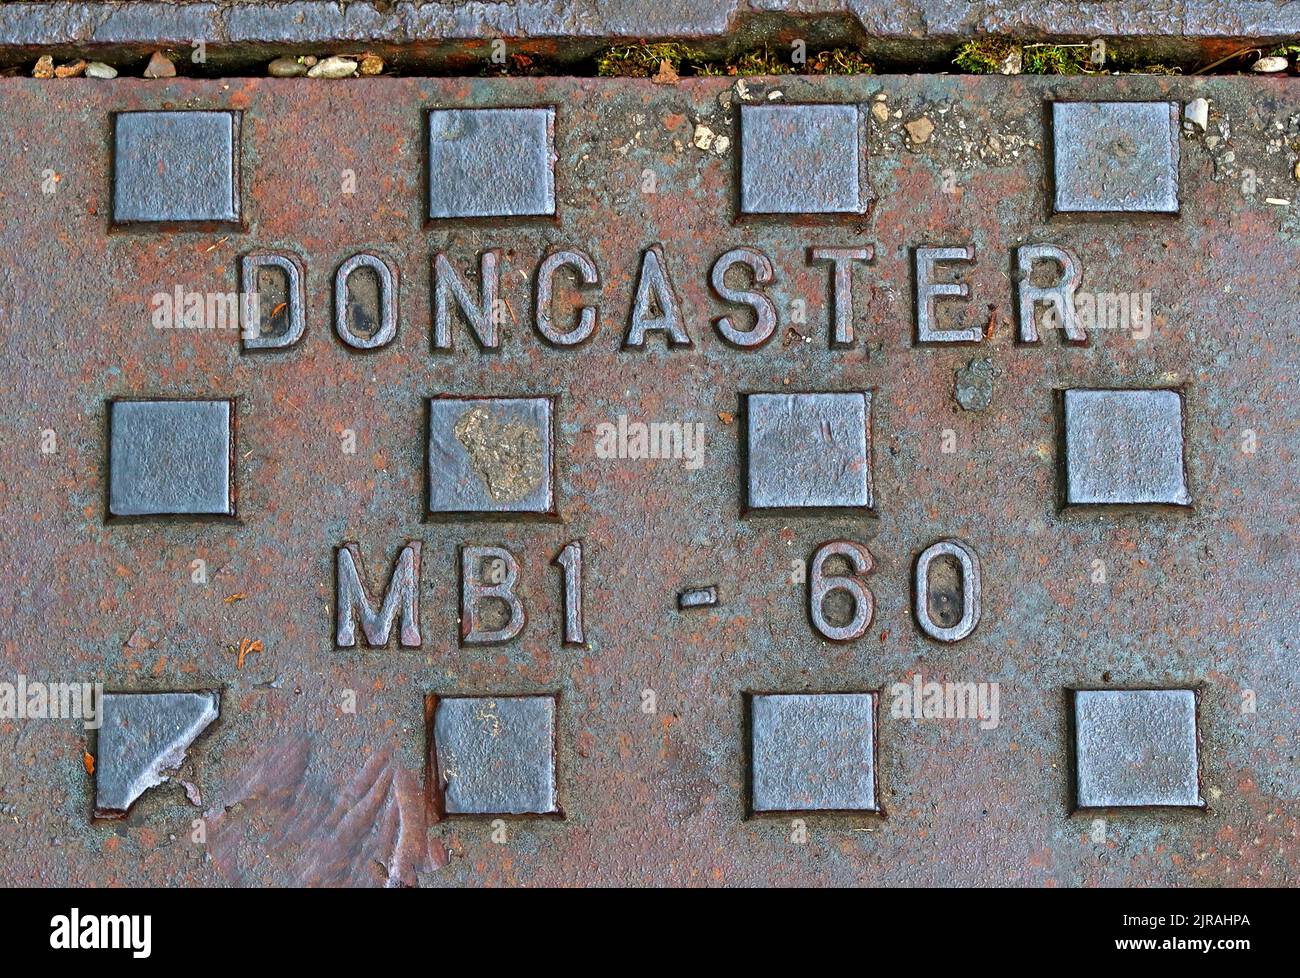 Doncaster, embossed cast iron grid, Yorkshire, England, UK, DN1 1AB Stock Photo